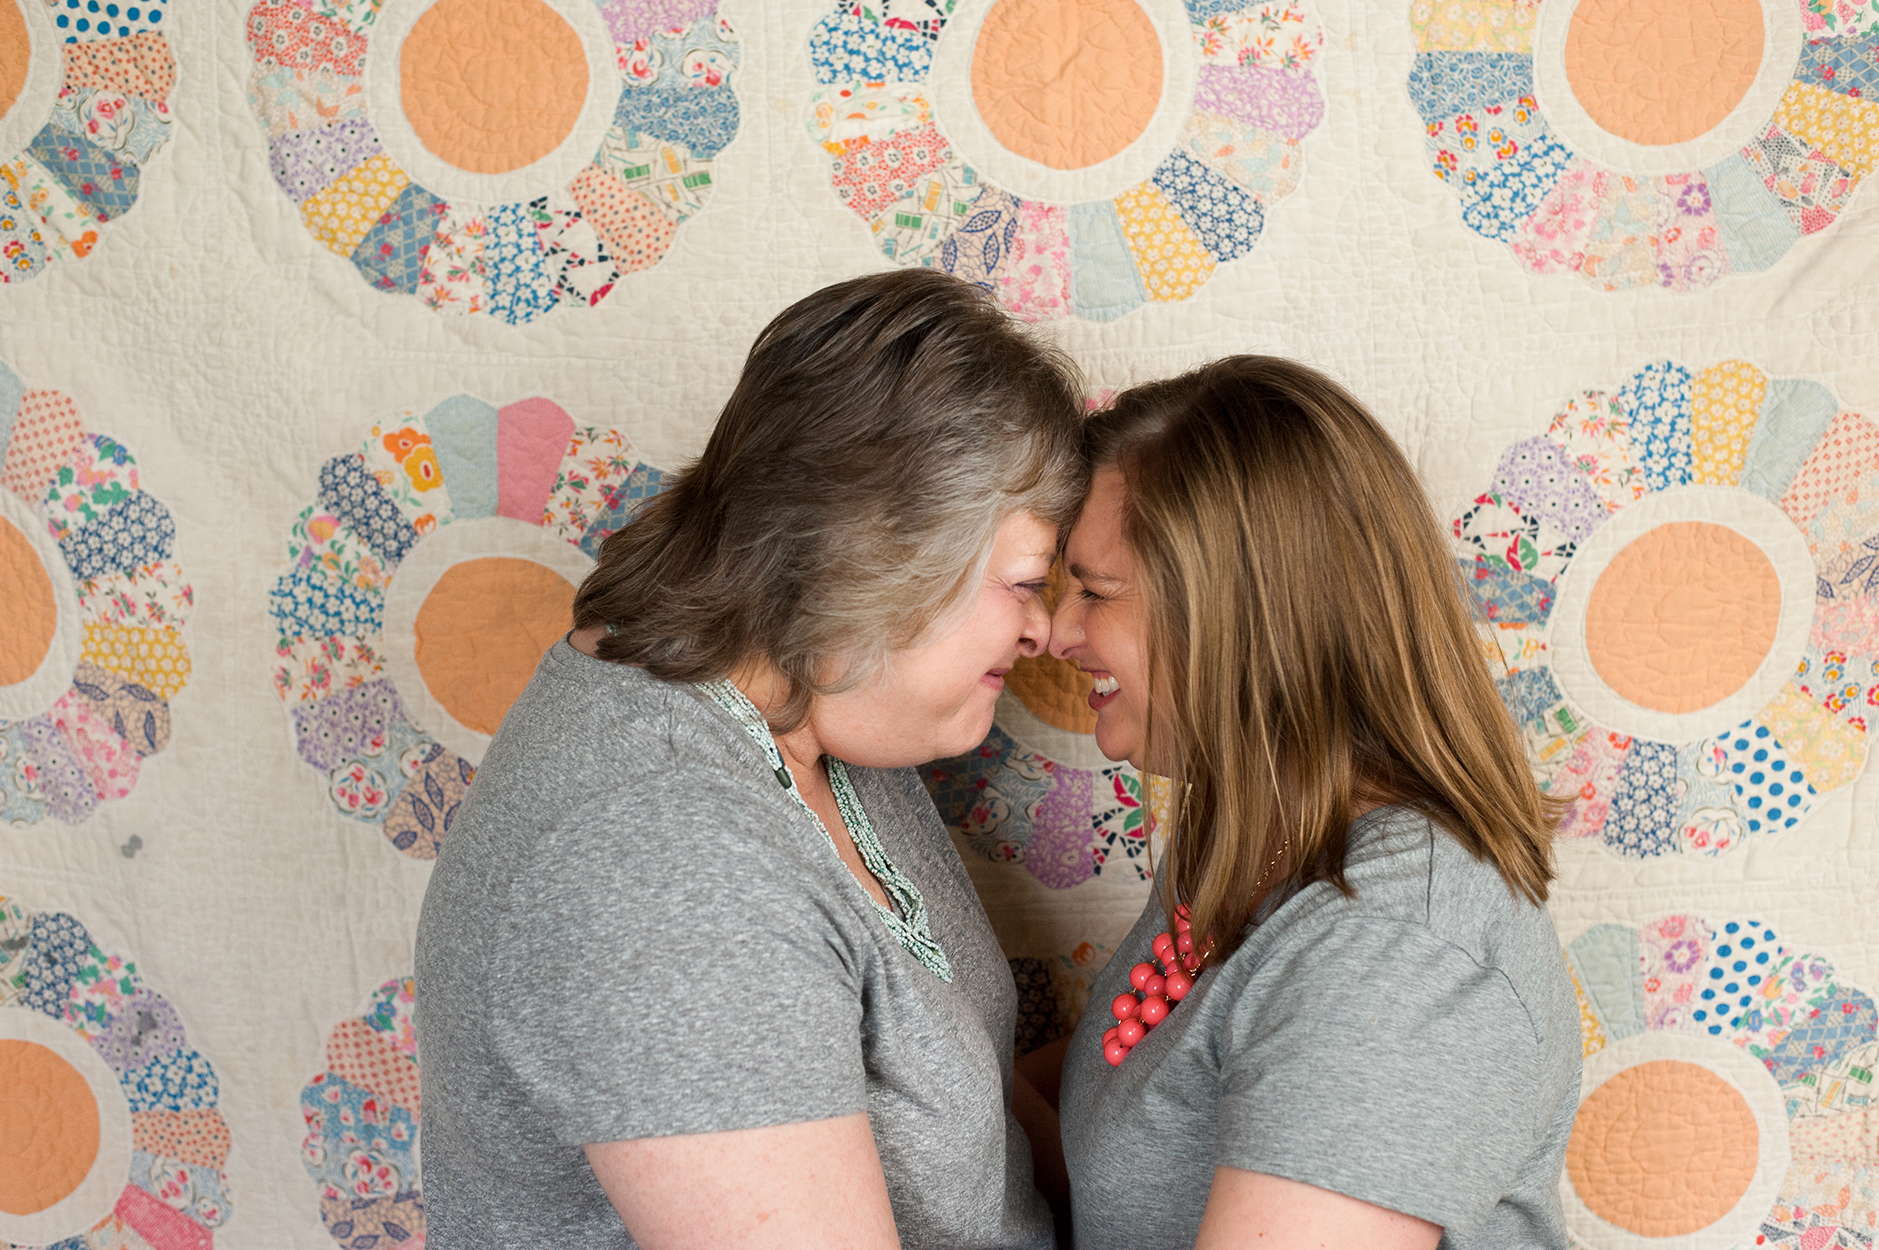 Mother daughter photo ideas, family photos, heirloom quilts, family quilts